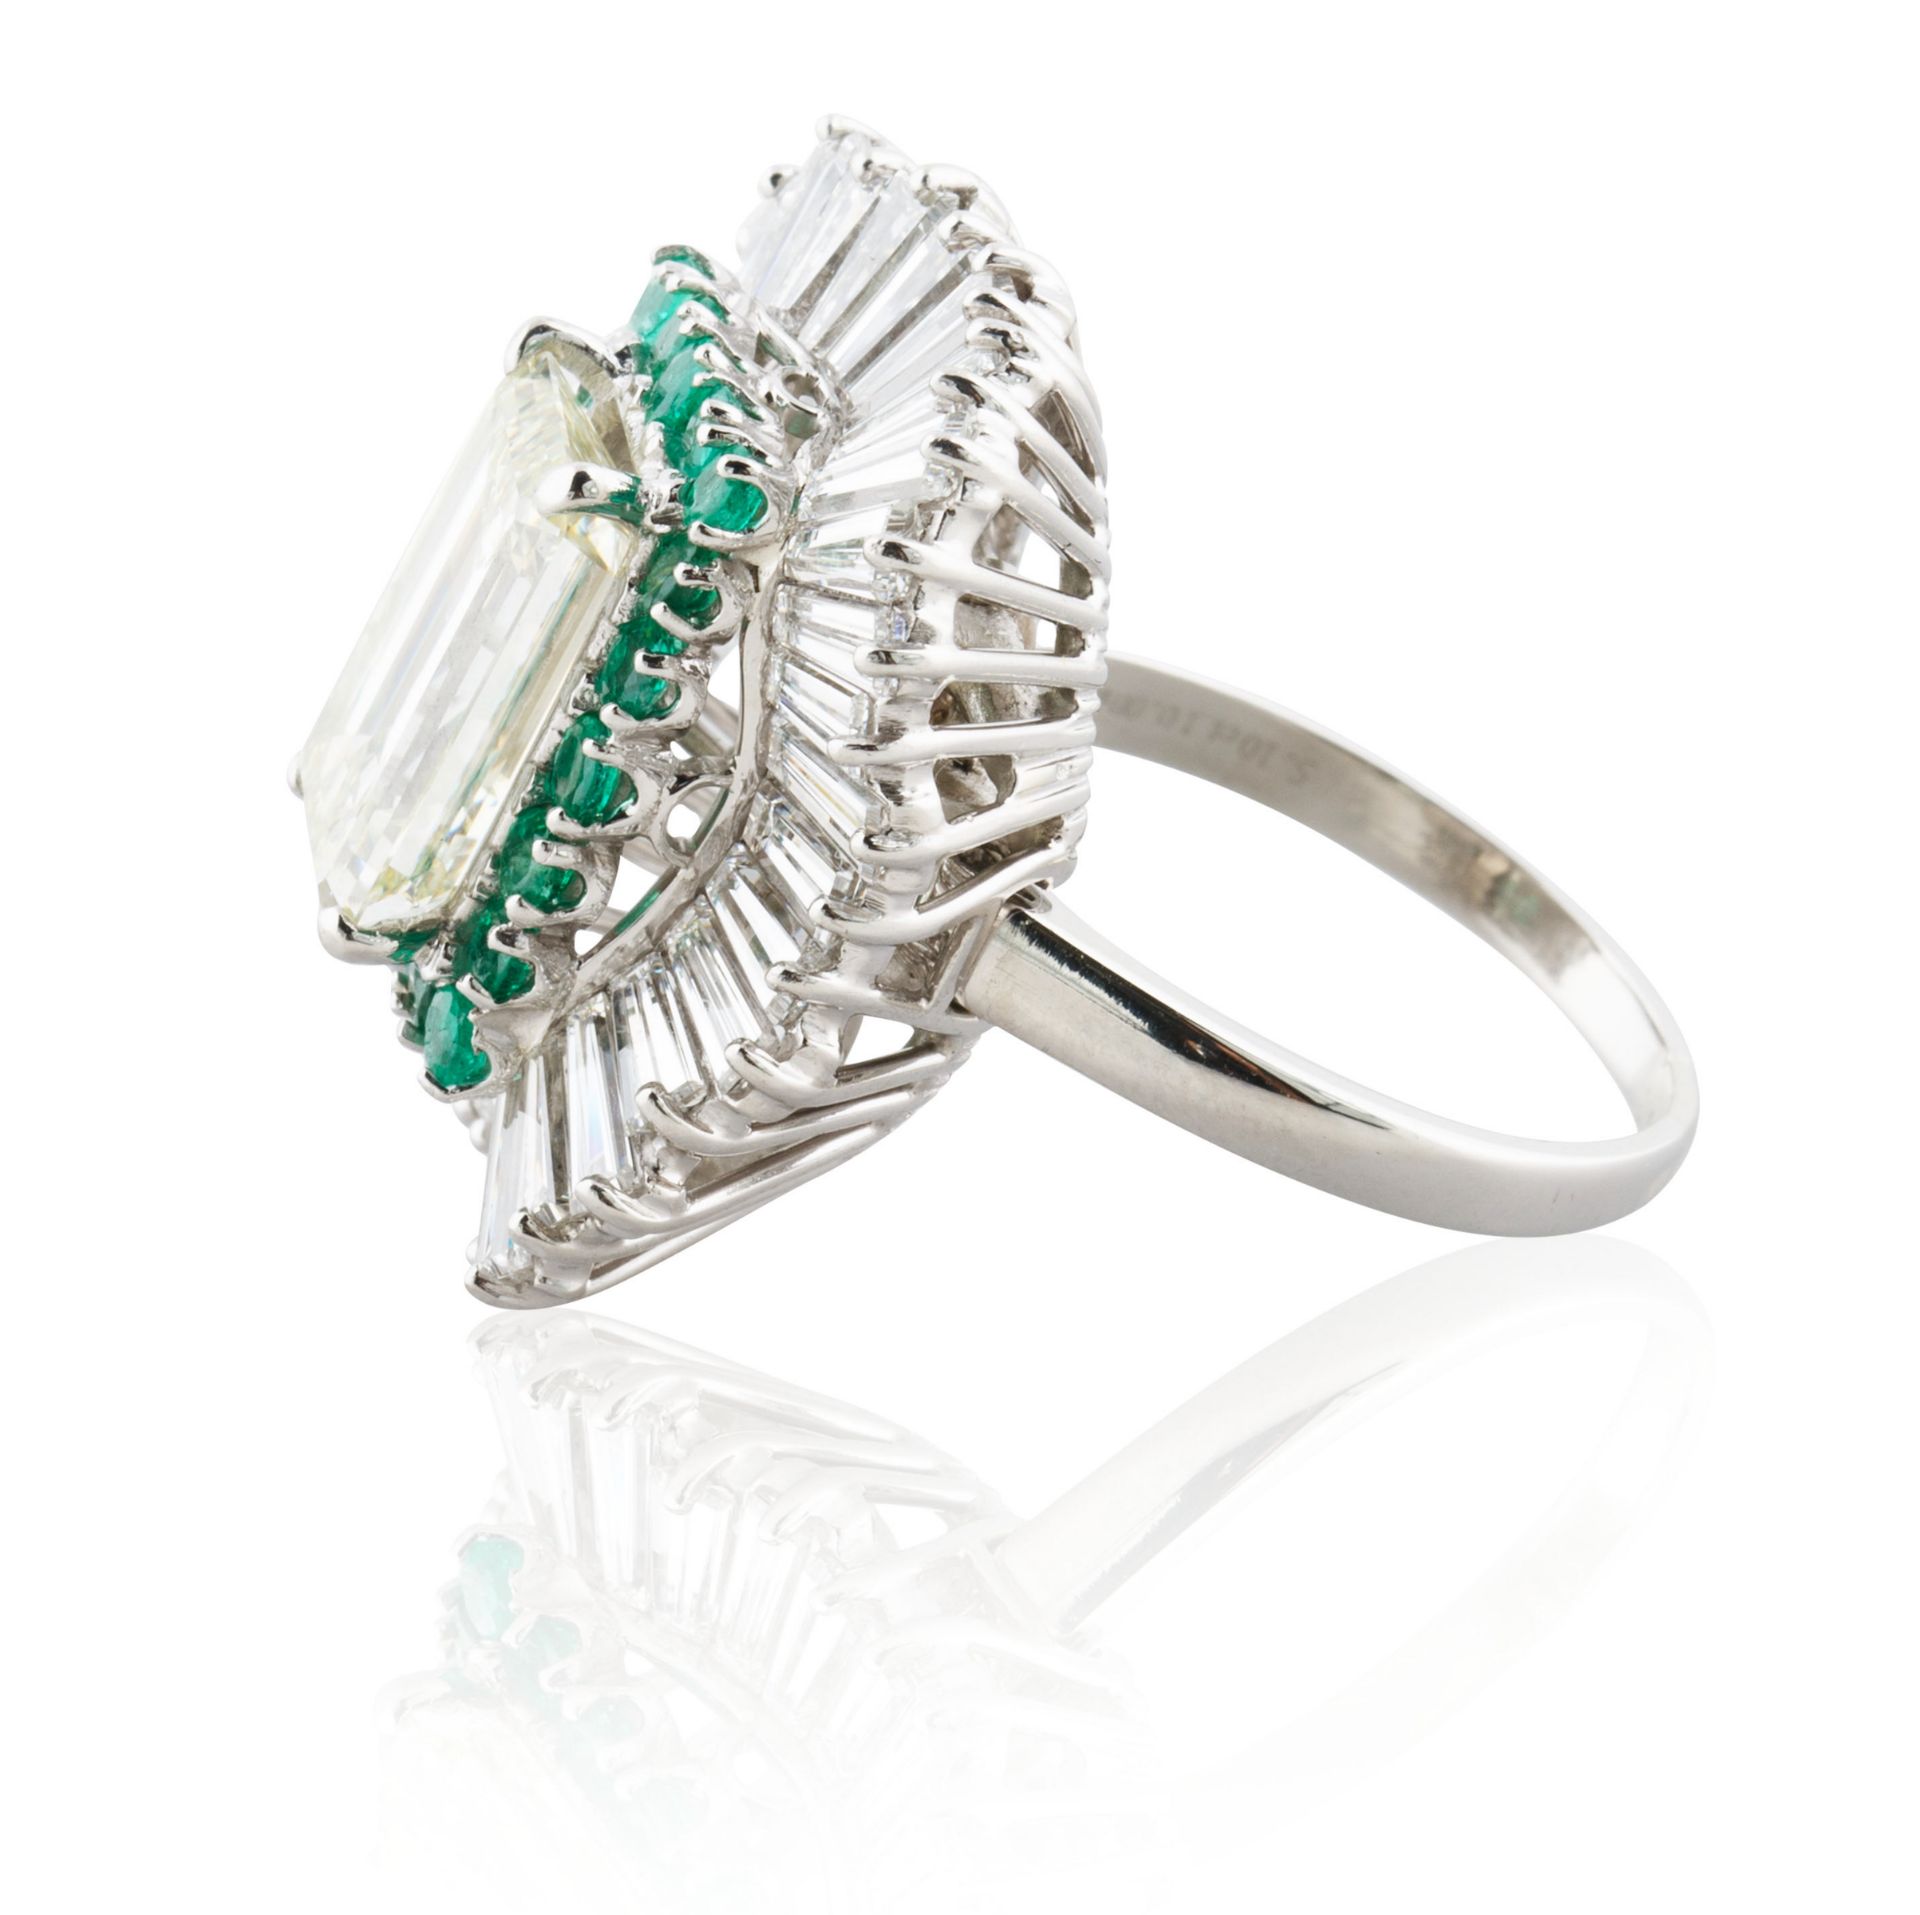 A 5.03 CT EMERALD CUT DIAMOND RING IN A BALLERINA SETTING - Image 2 of 7